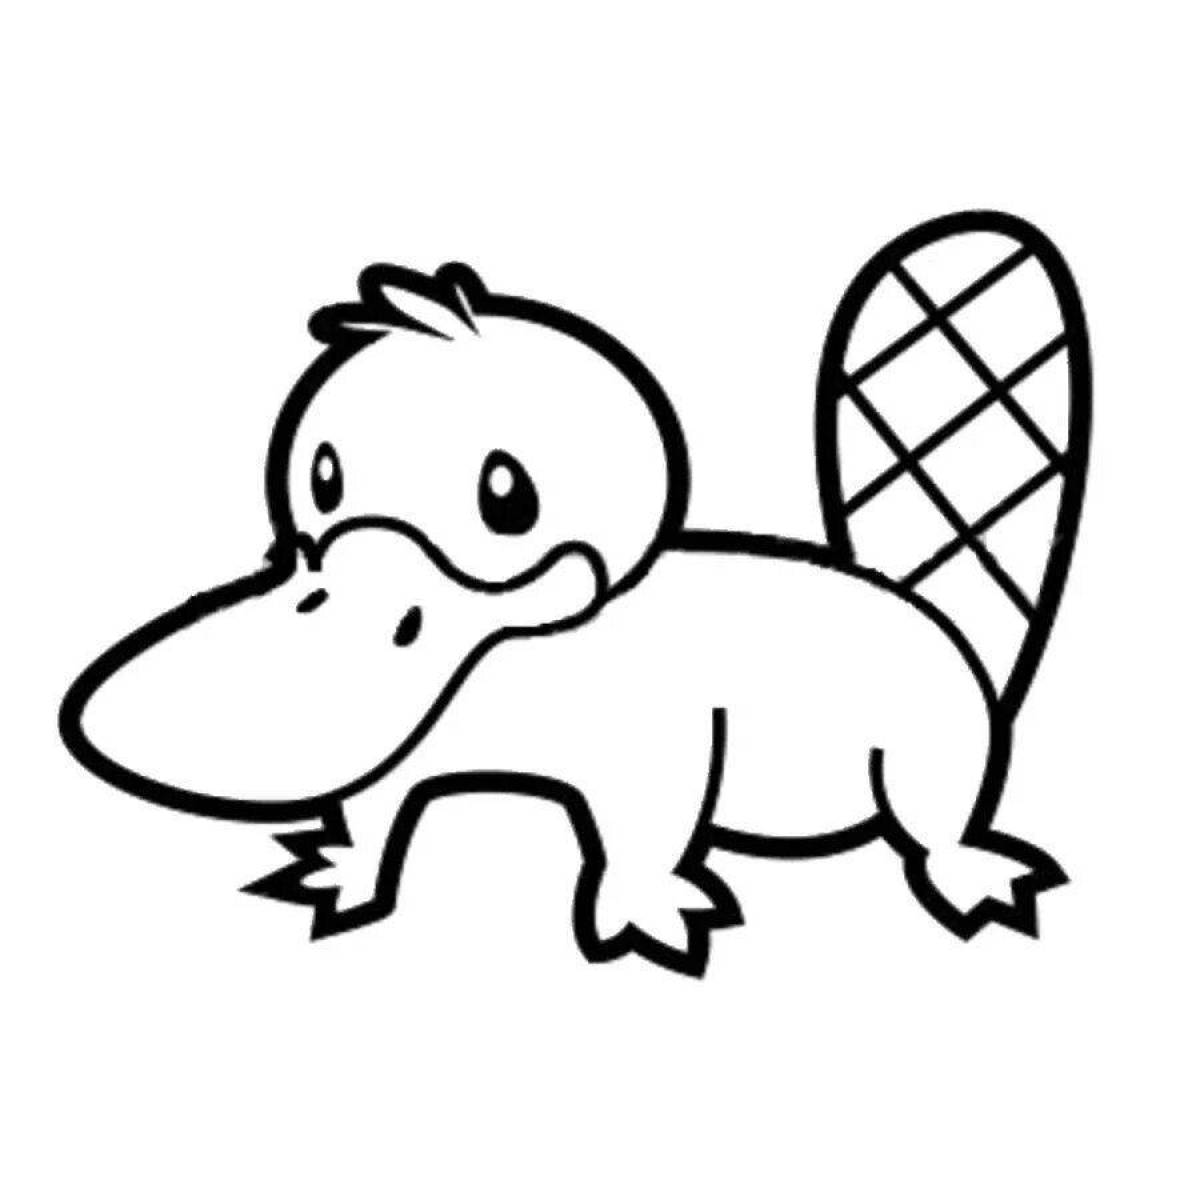 Cute platypus coloring book for kids